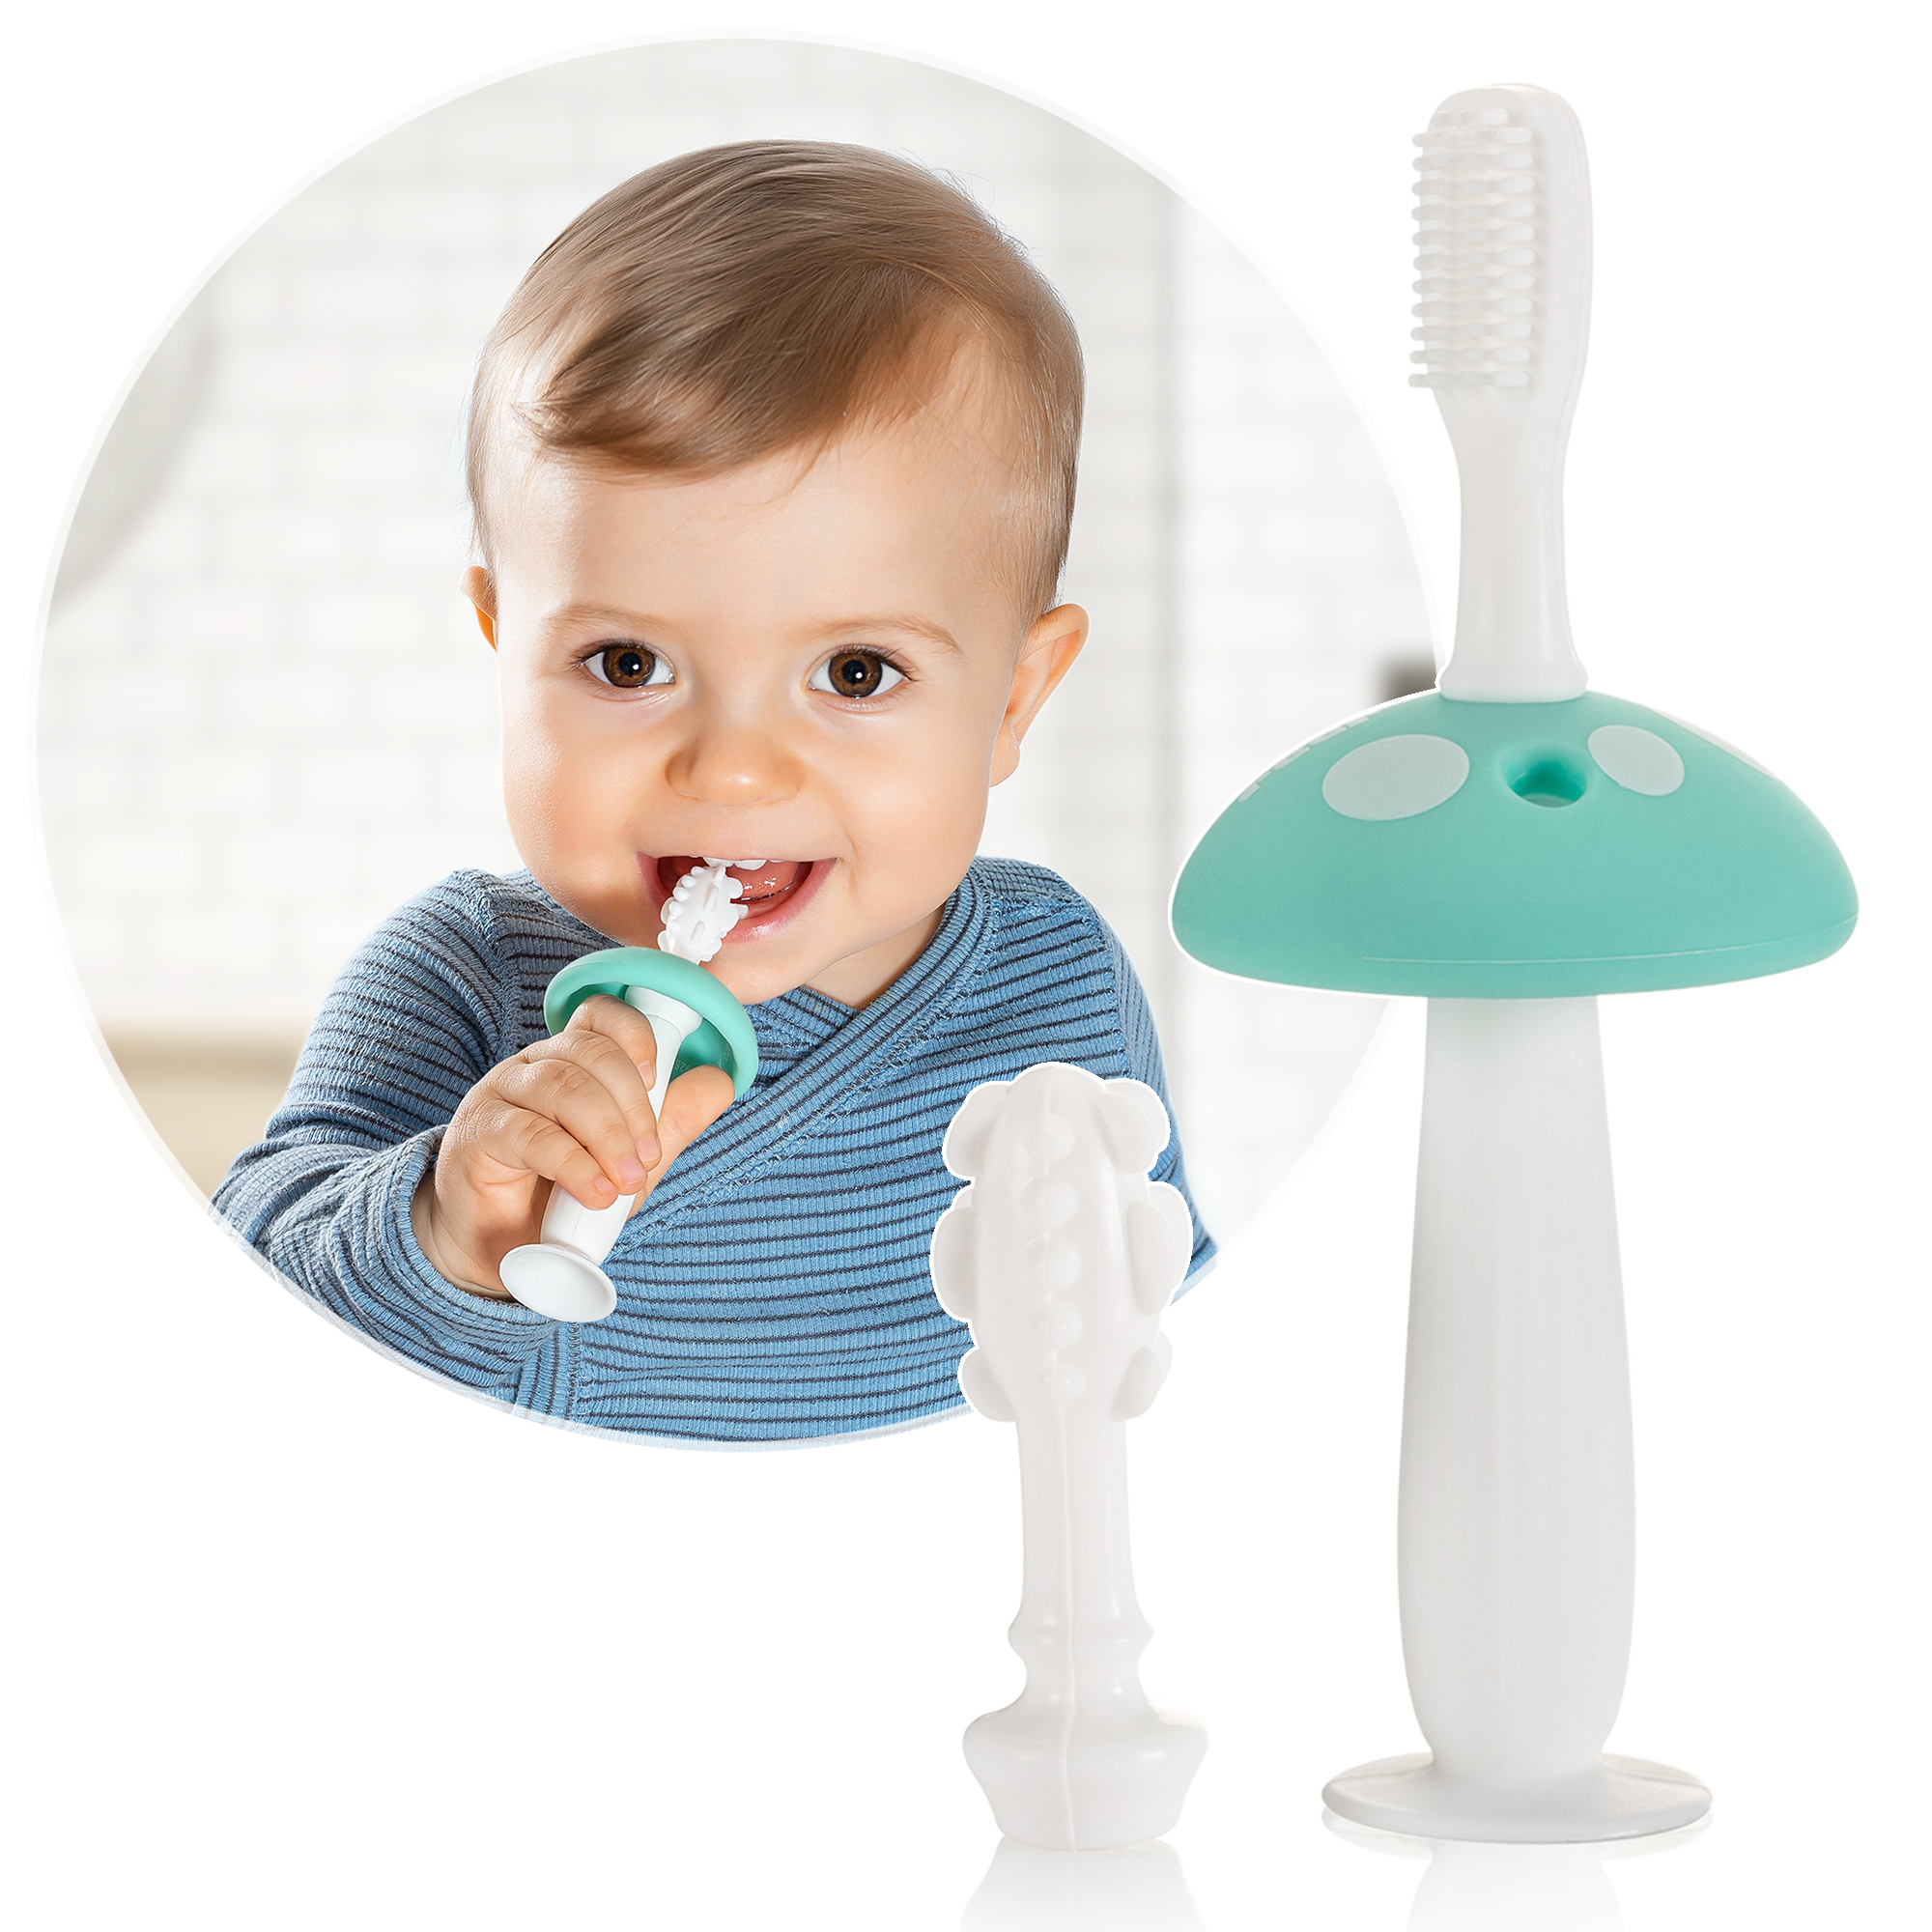 BabyCare toothbrush trainer